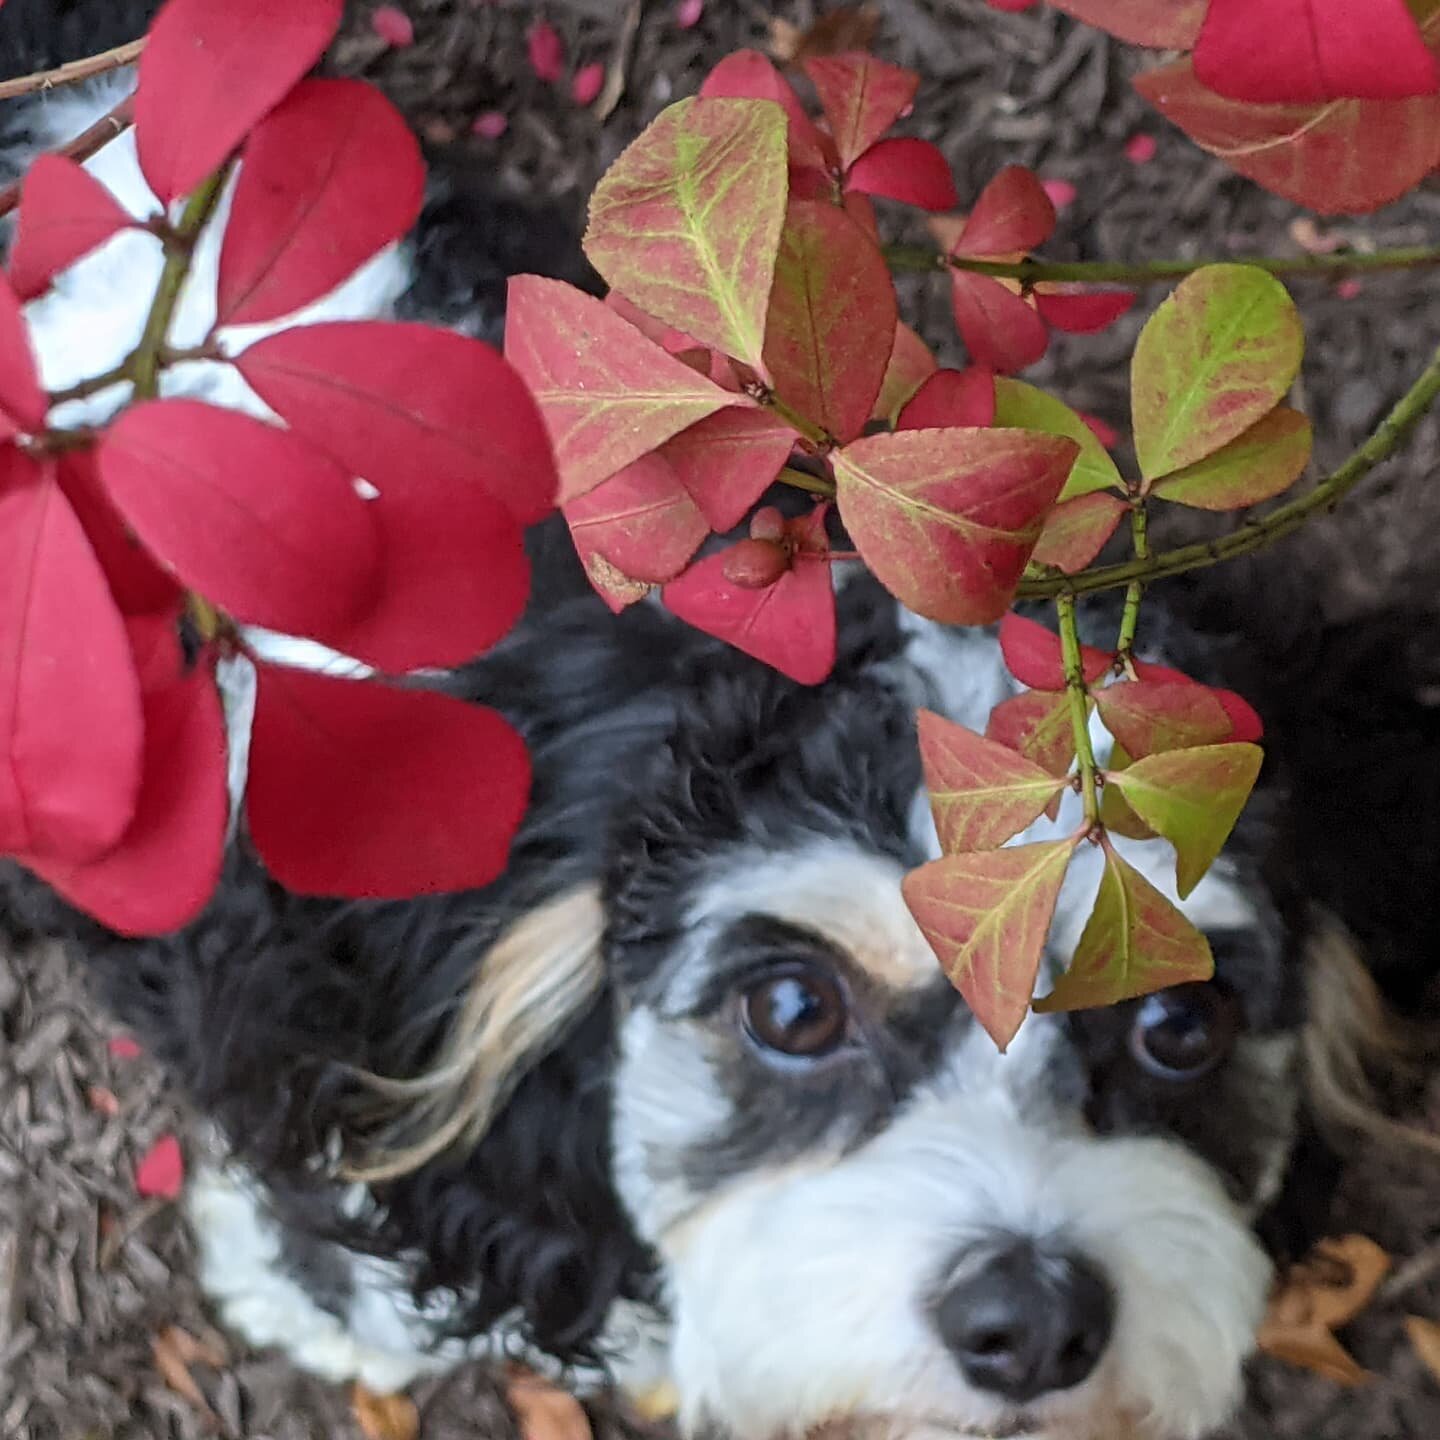 Fall has arrived and the air this morning is sweet and decidedly chilly! Hastings helped me inspect some of the early fall color 🍁 He thought some of it looked fairly edible 😂